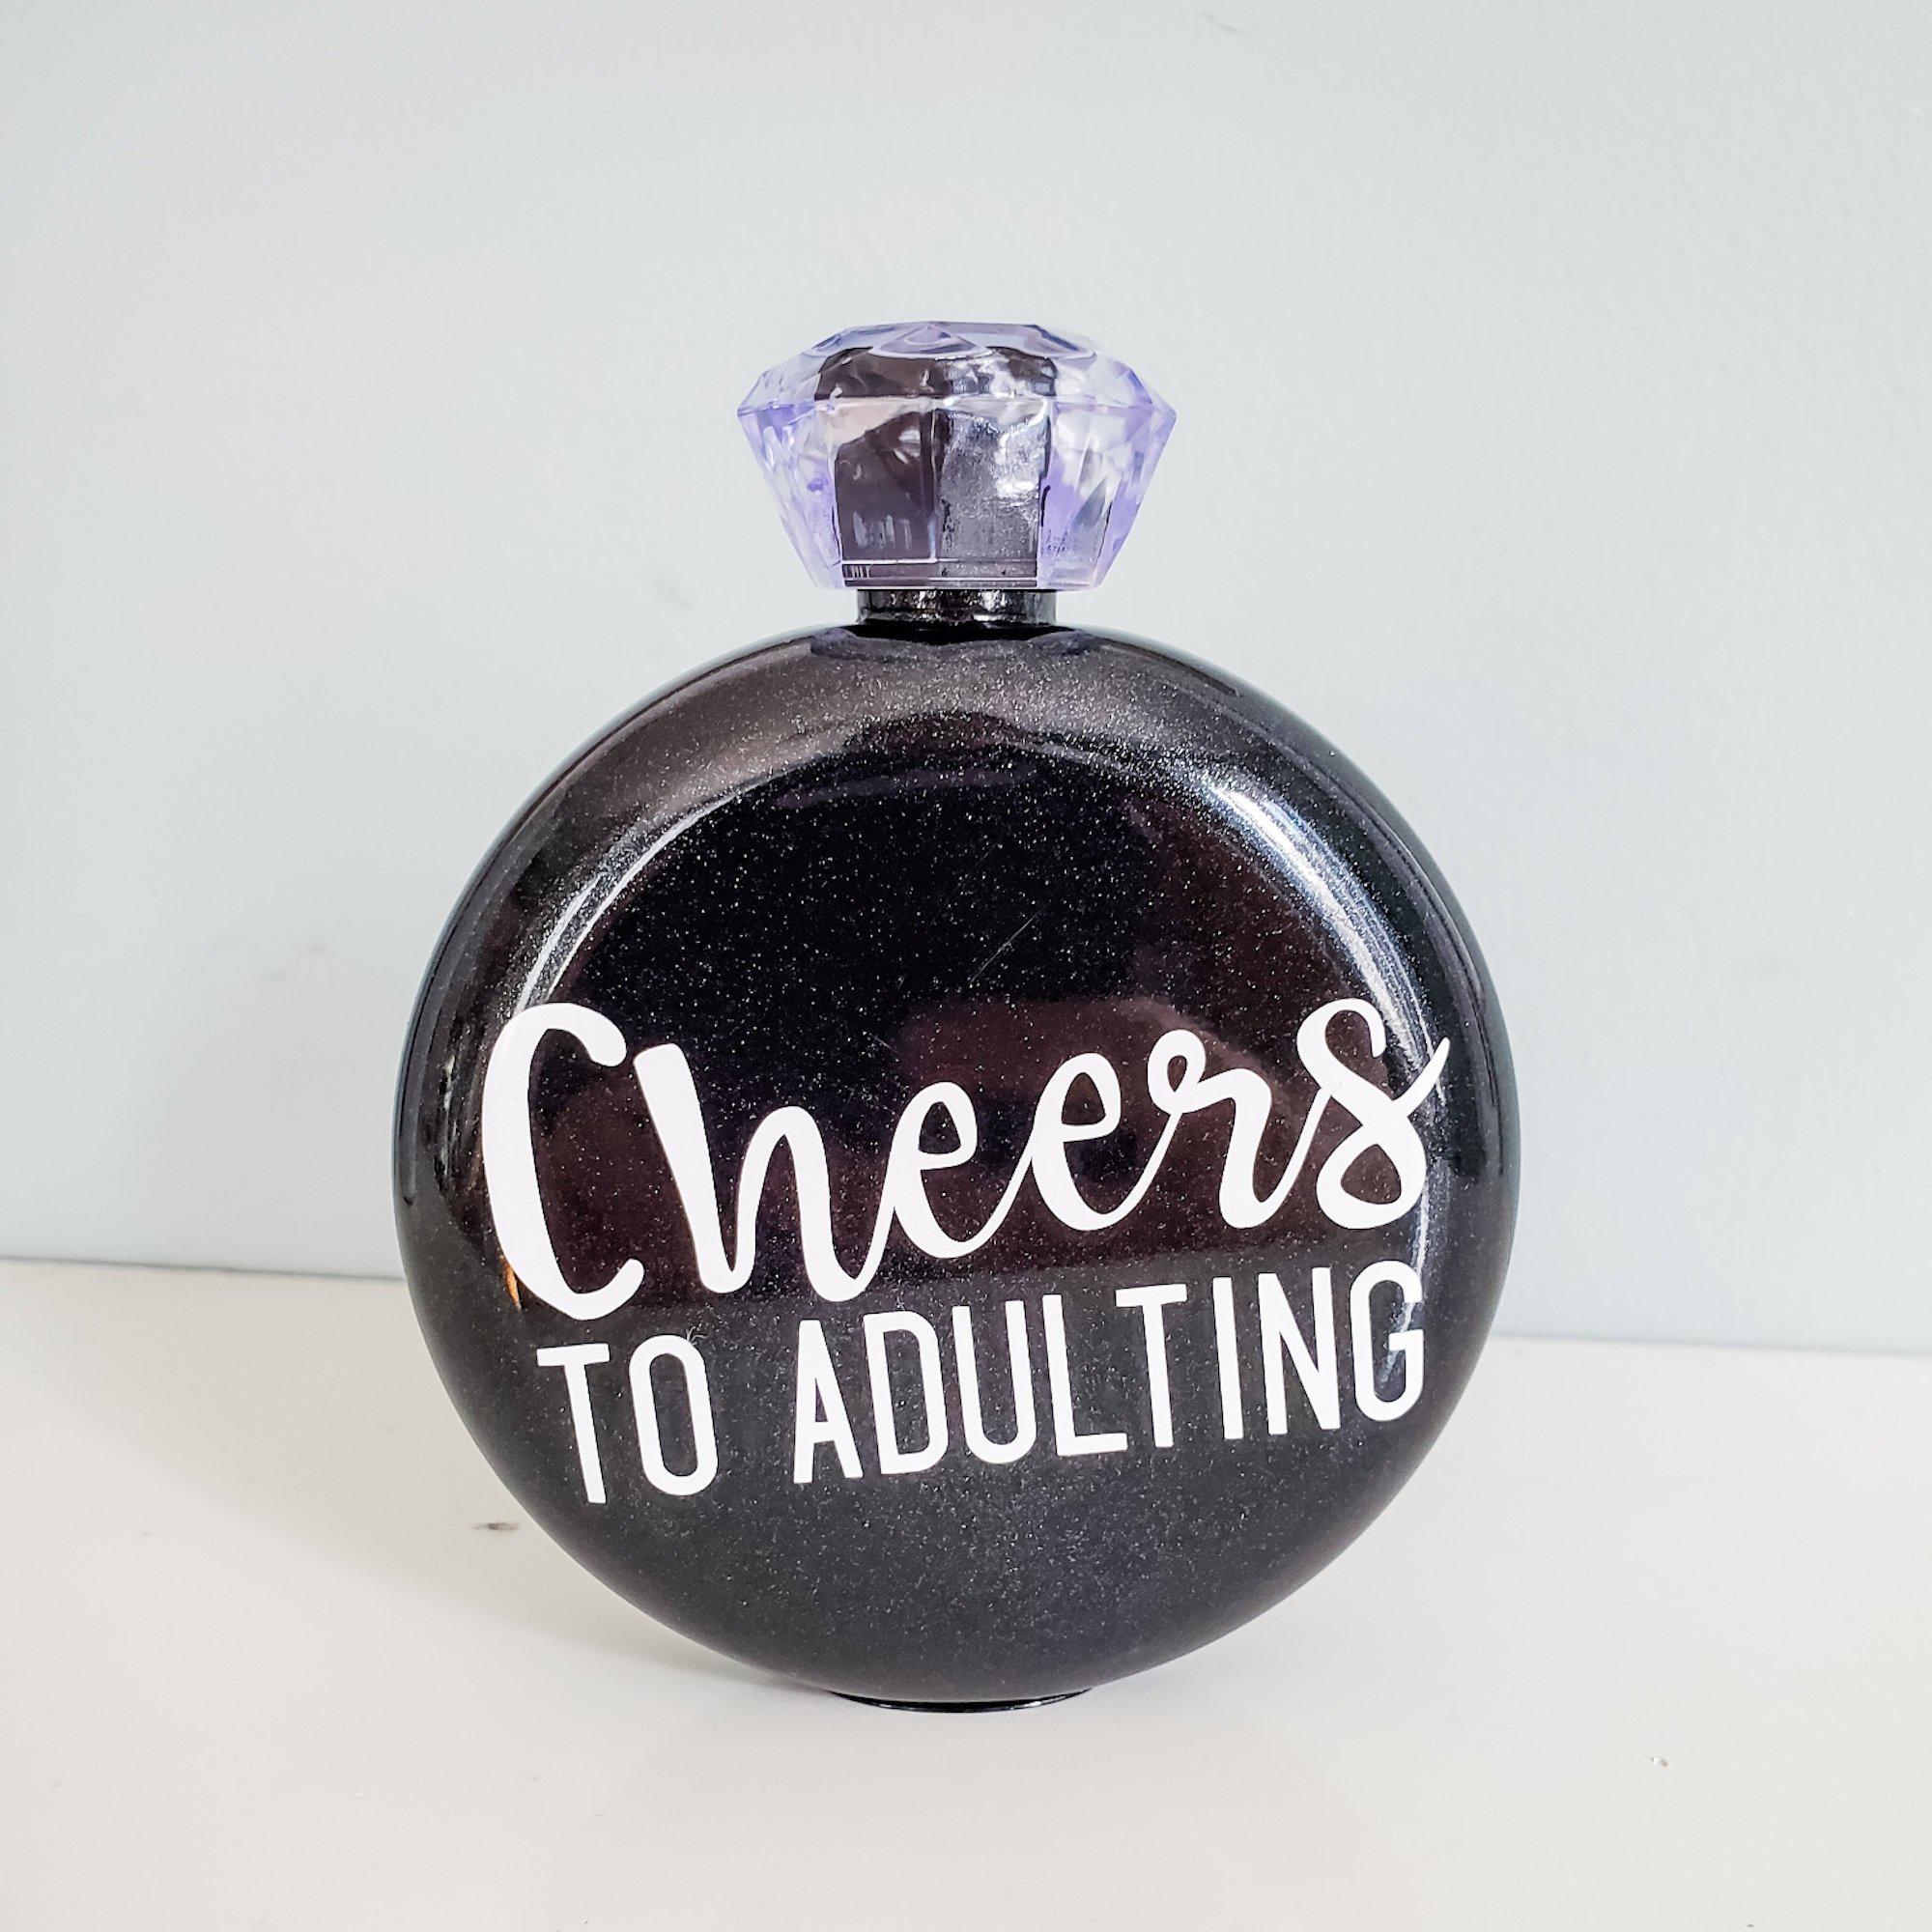 CHEERS TO ADULTING Jewel Flask Salt and Sparkle